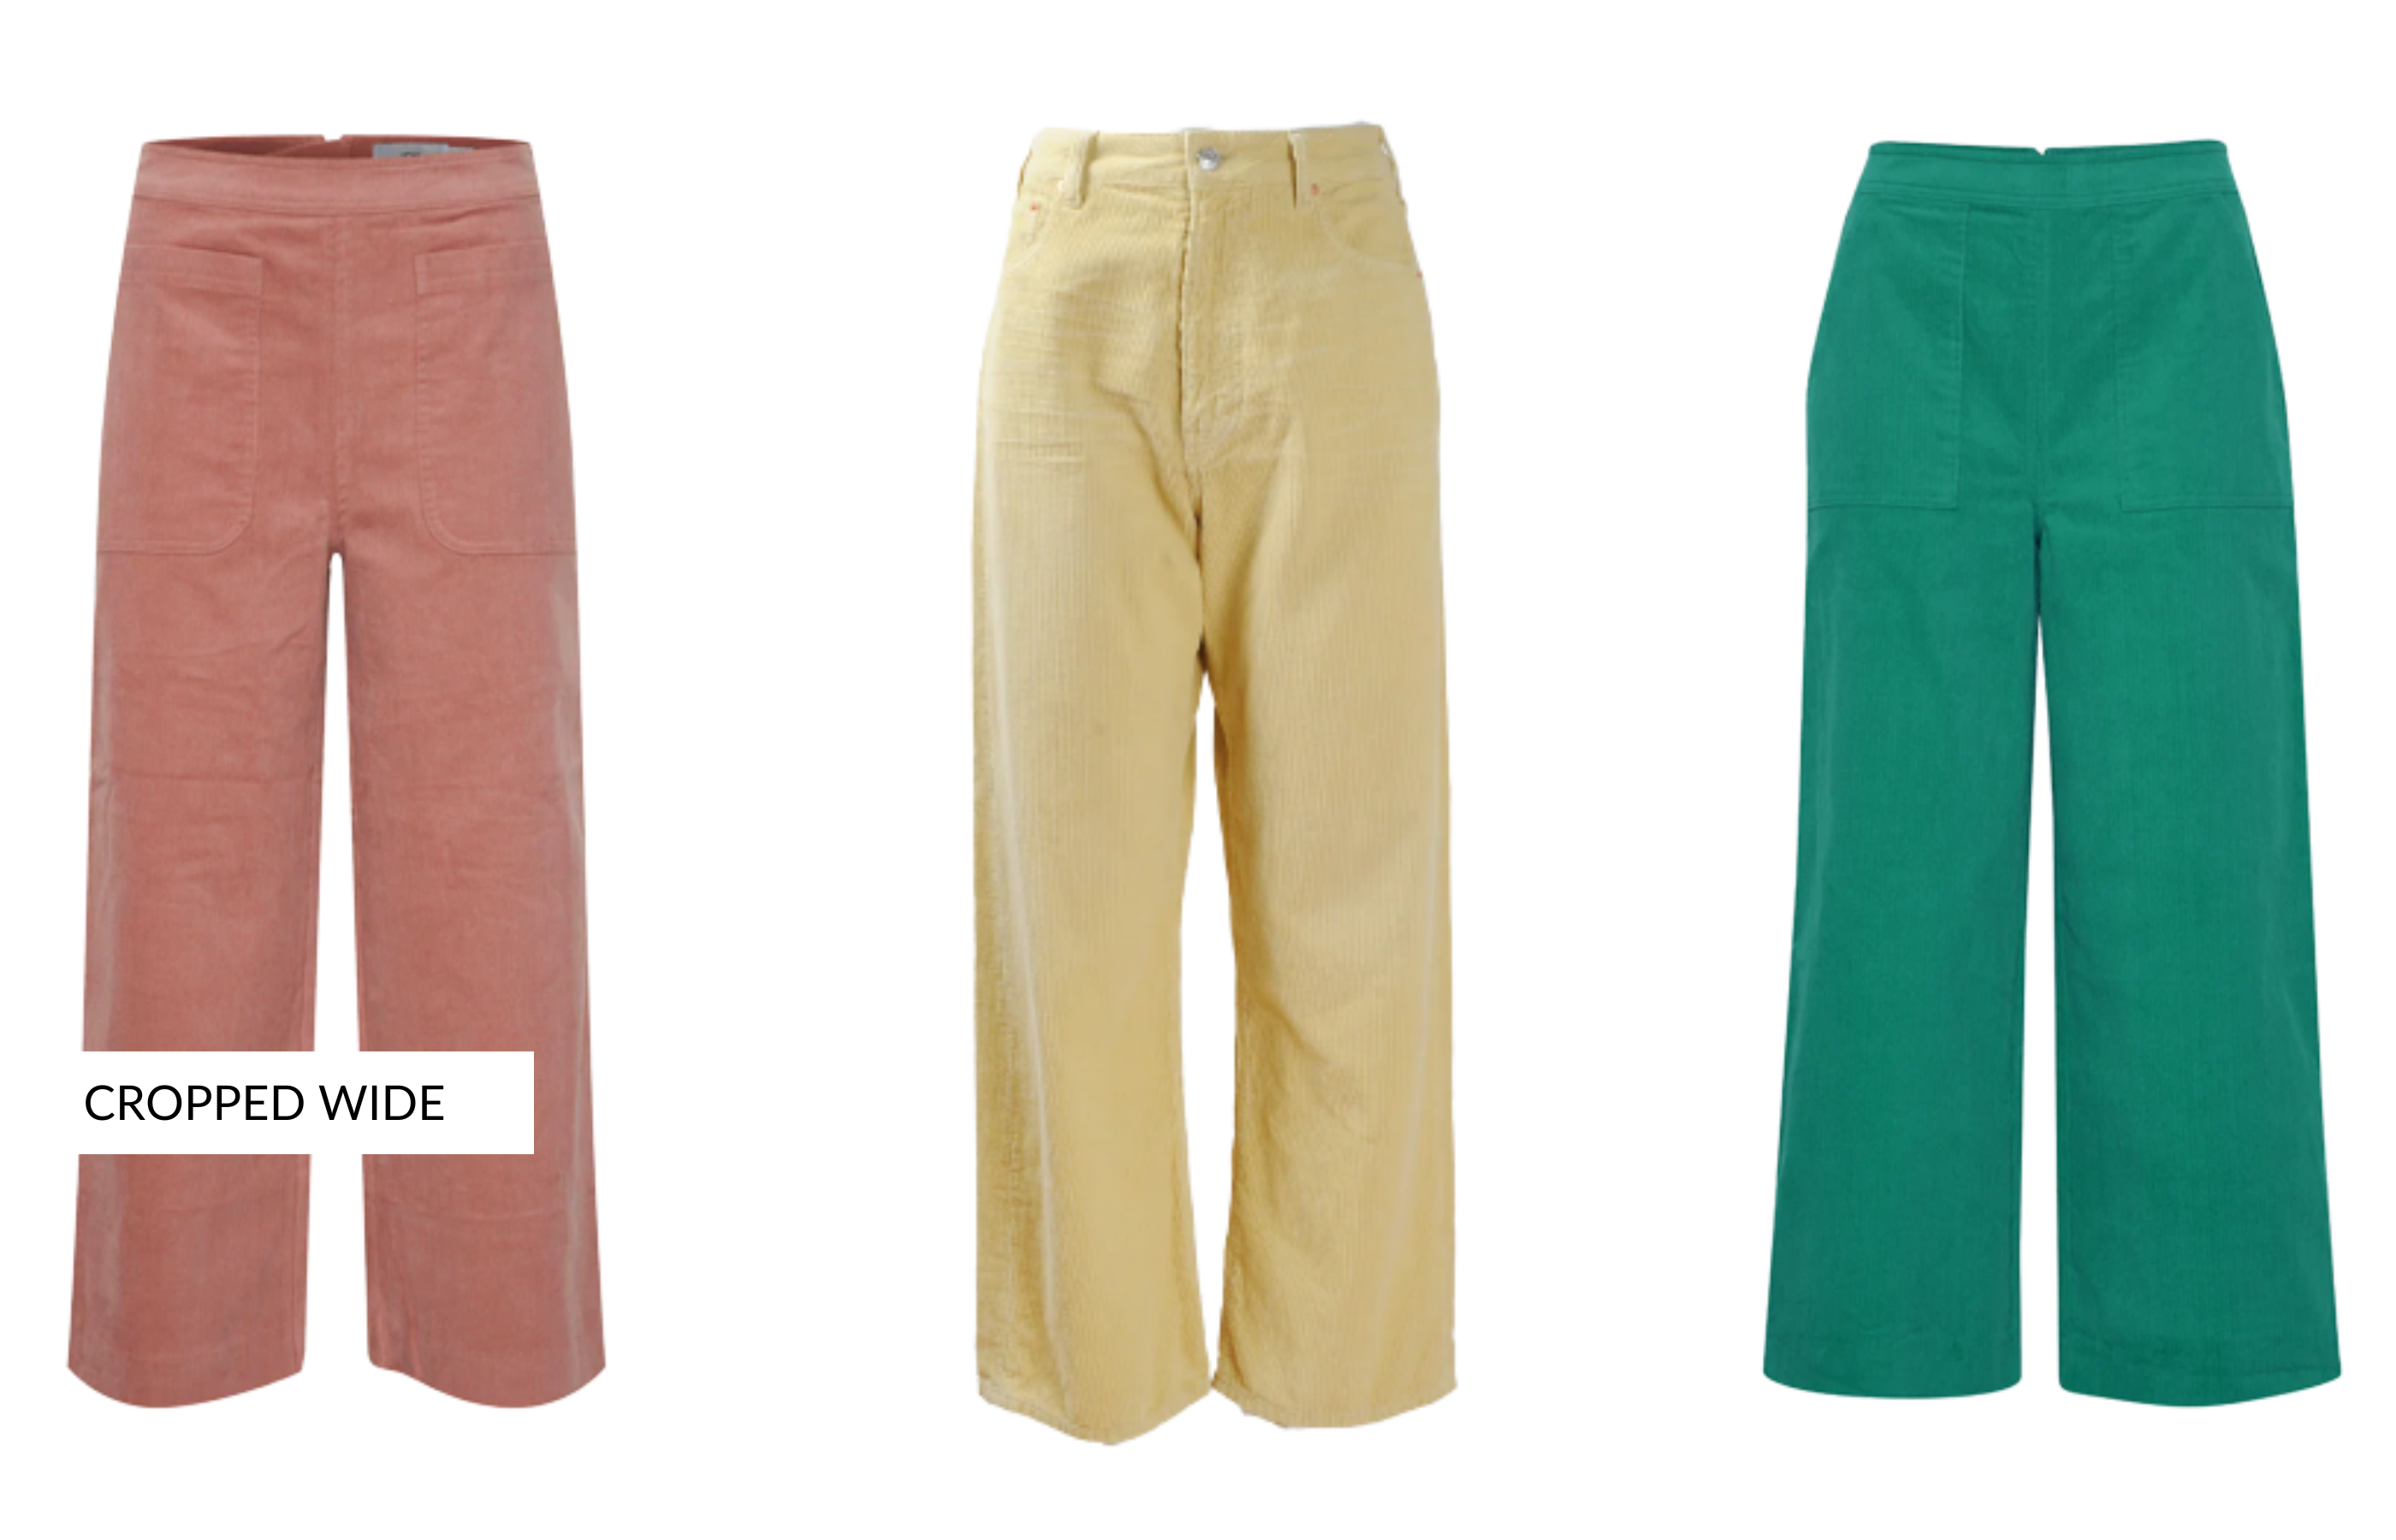 Wide Cropped Leg Cord Trouser Options